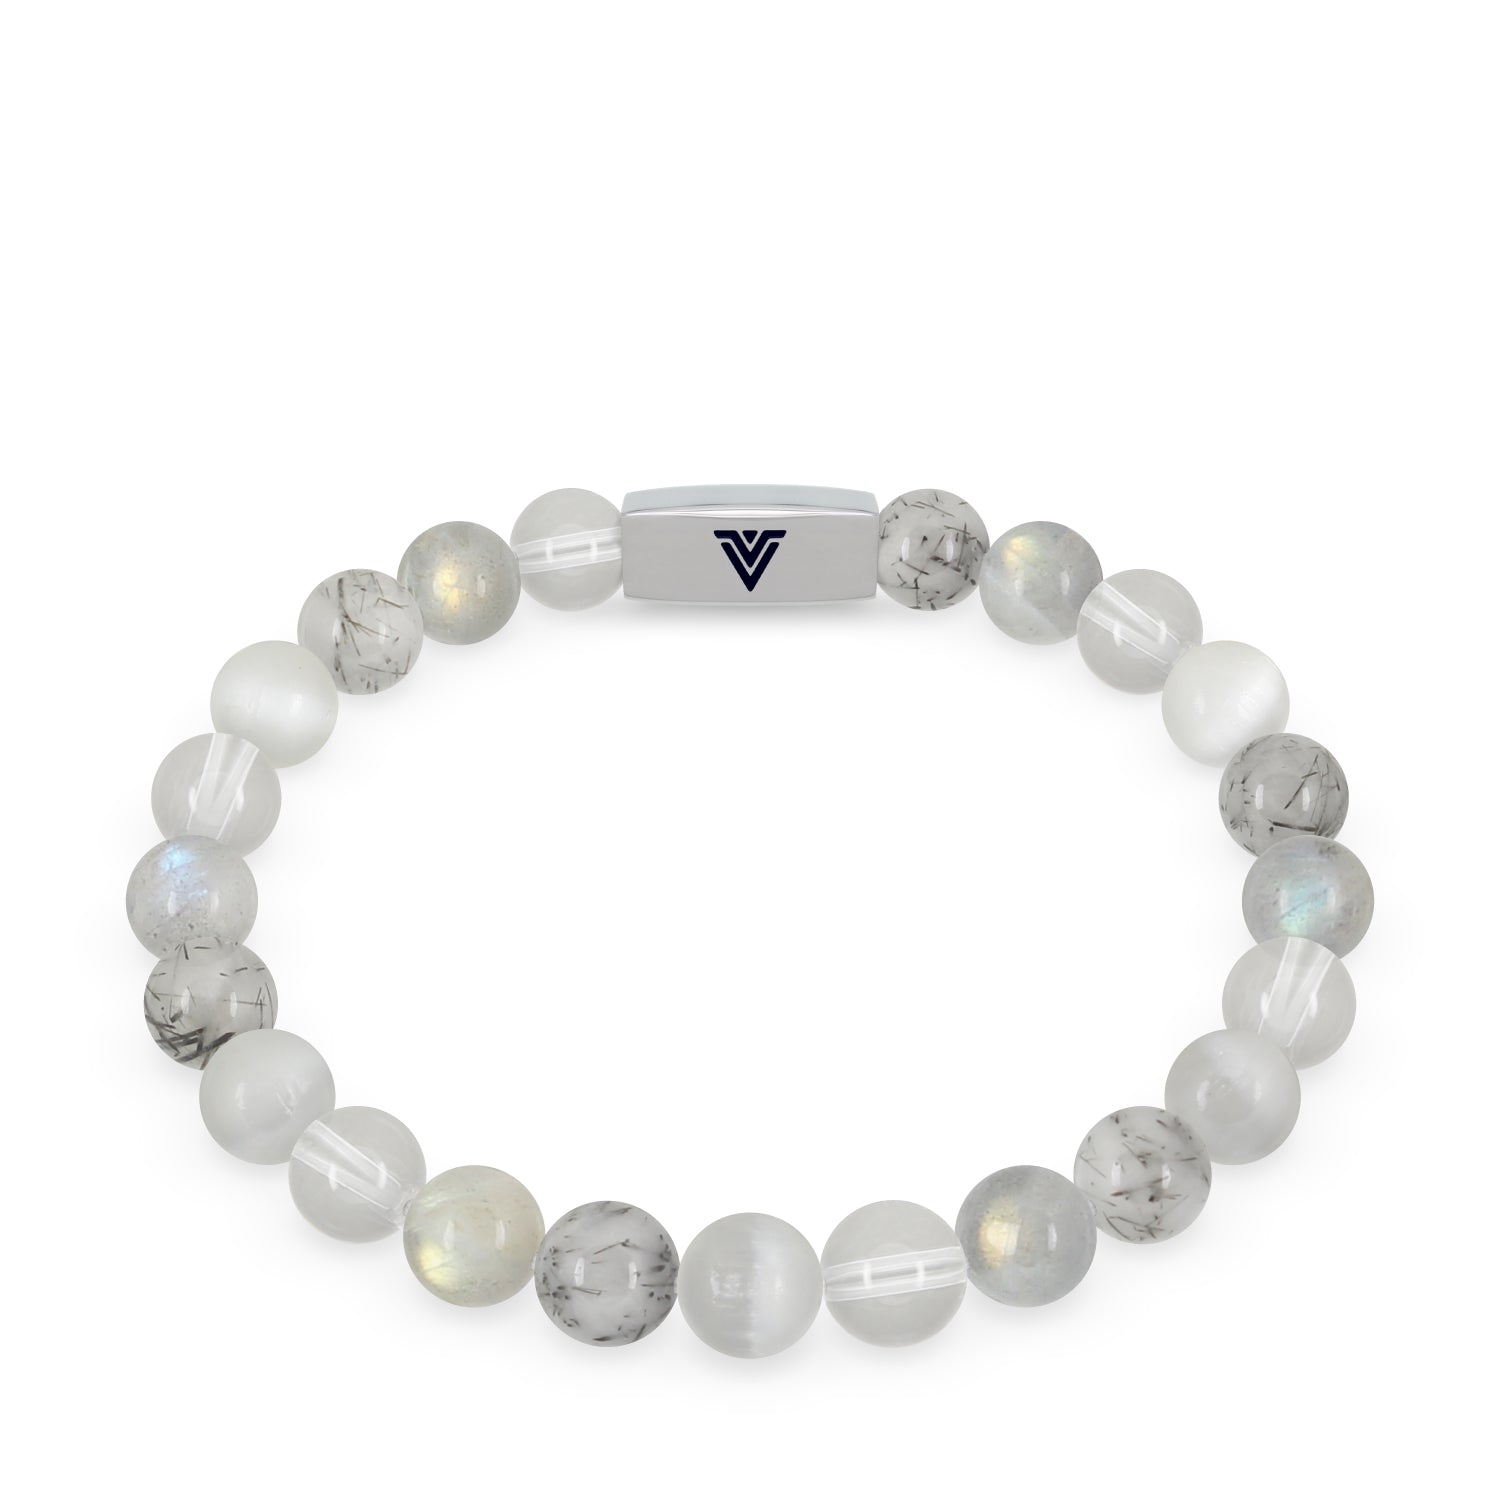 Front view of an 8mm Crown Chakra beaded stretch bracelet featuring Quartz, Labradorite, Tourmalinated Quartz, & Selenite crystal and silver stainless steel logo bead made by Voltlin